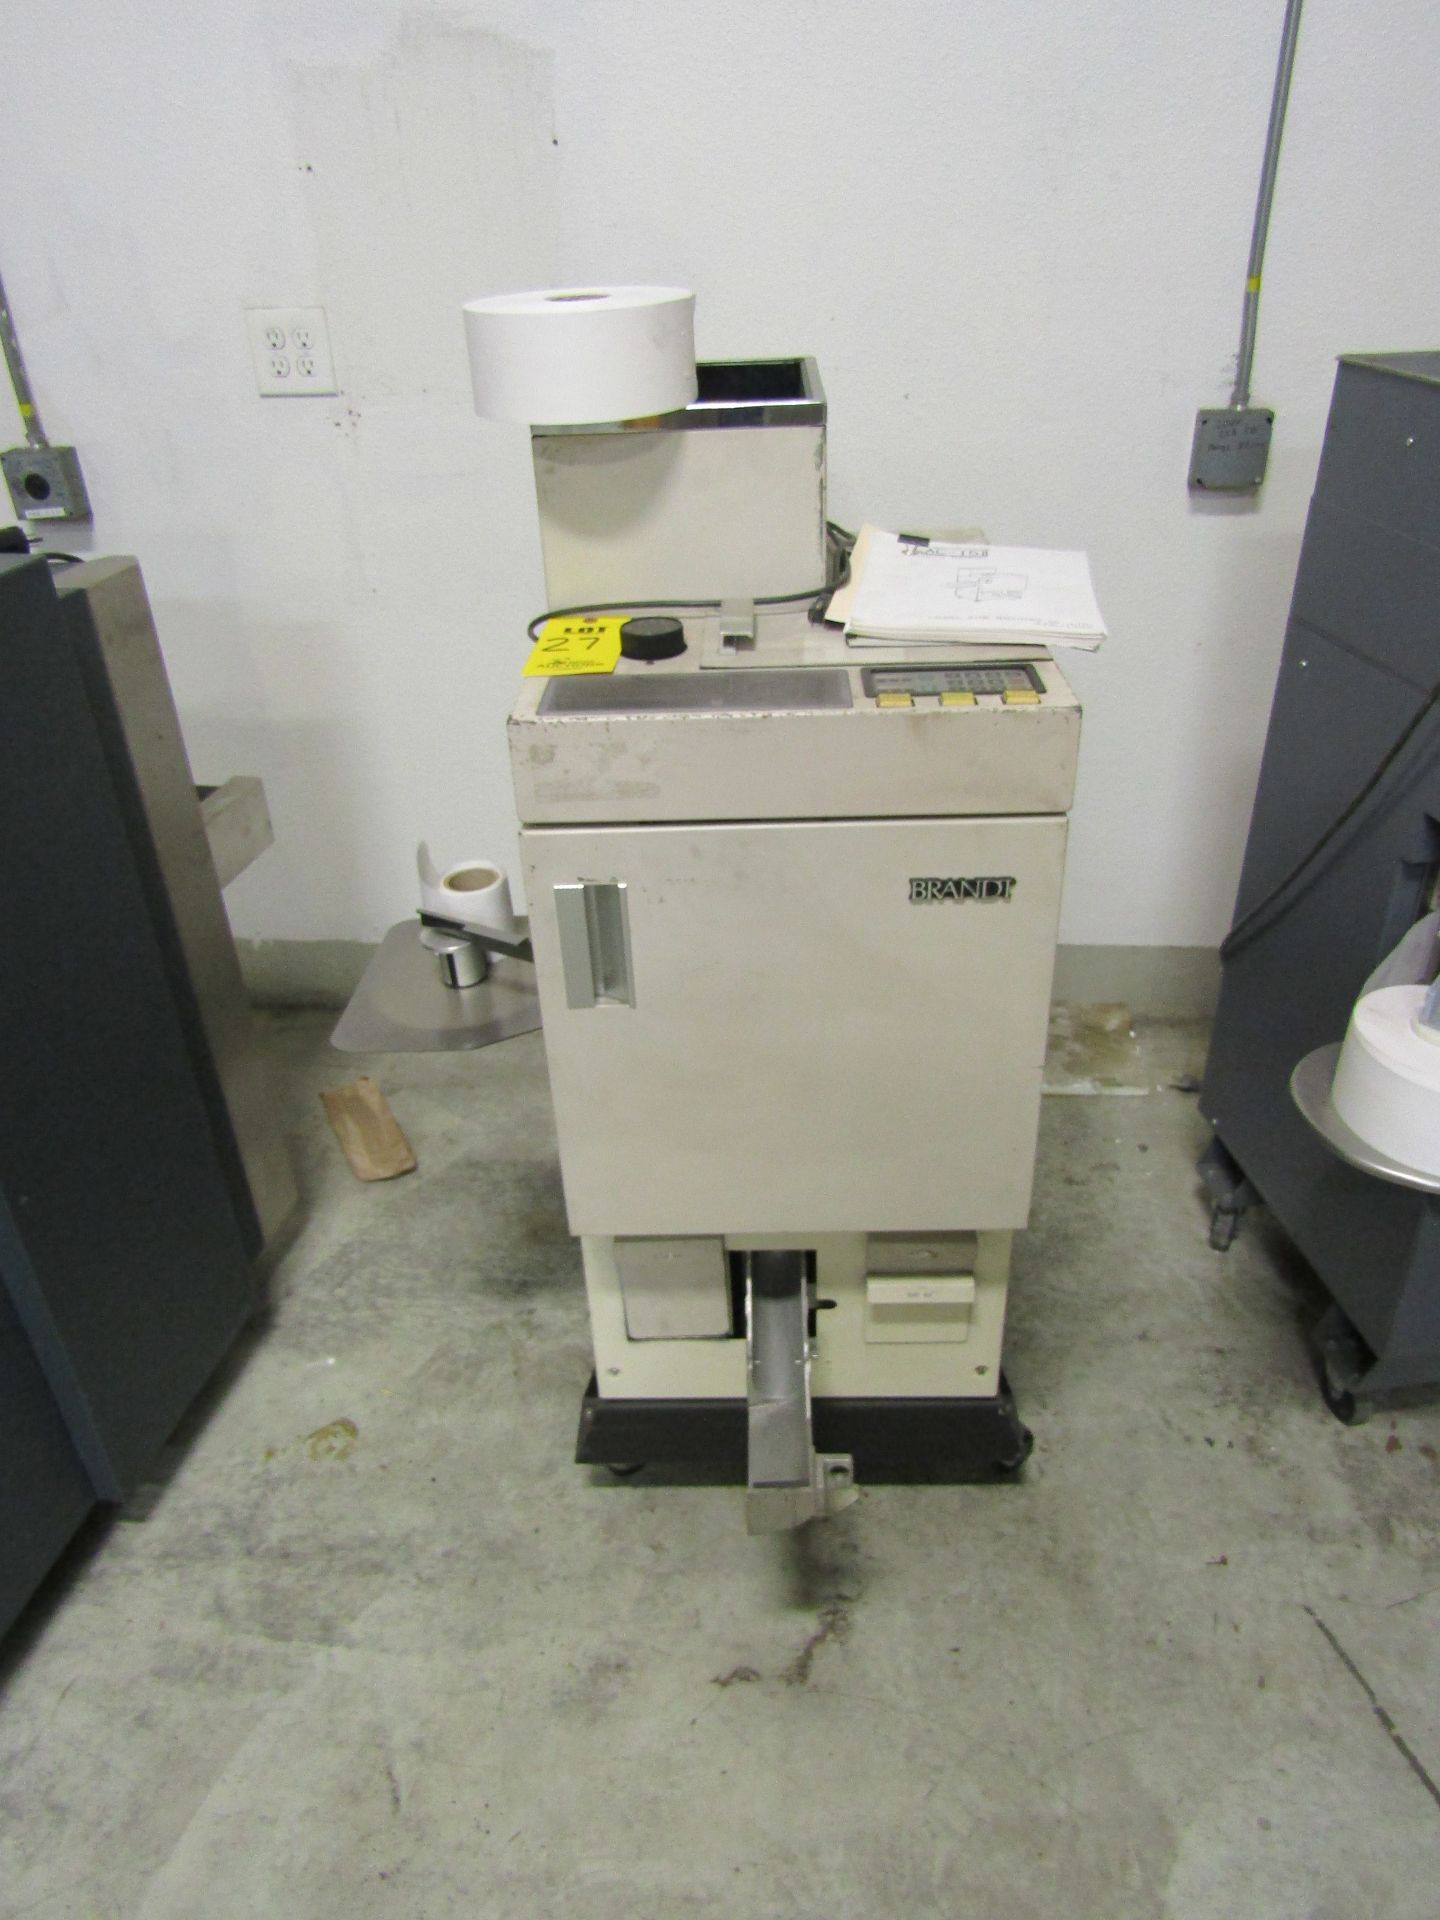 BRANDT Automatic Coin Wrapping Machine with Spare Roll of Packing Paper, Model 2435120, S/N 698498